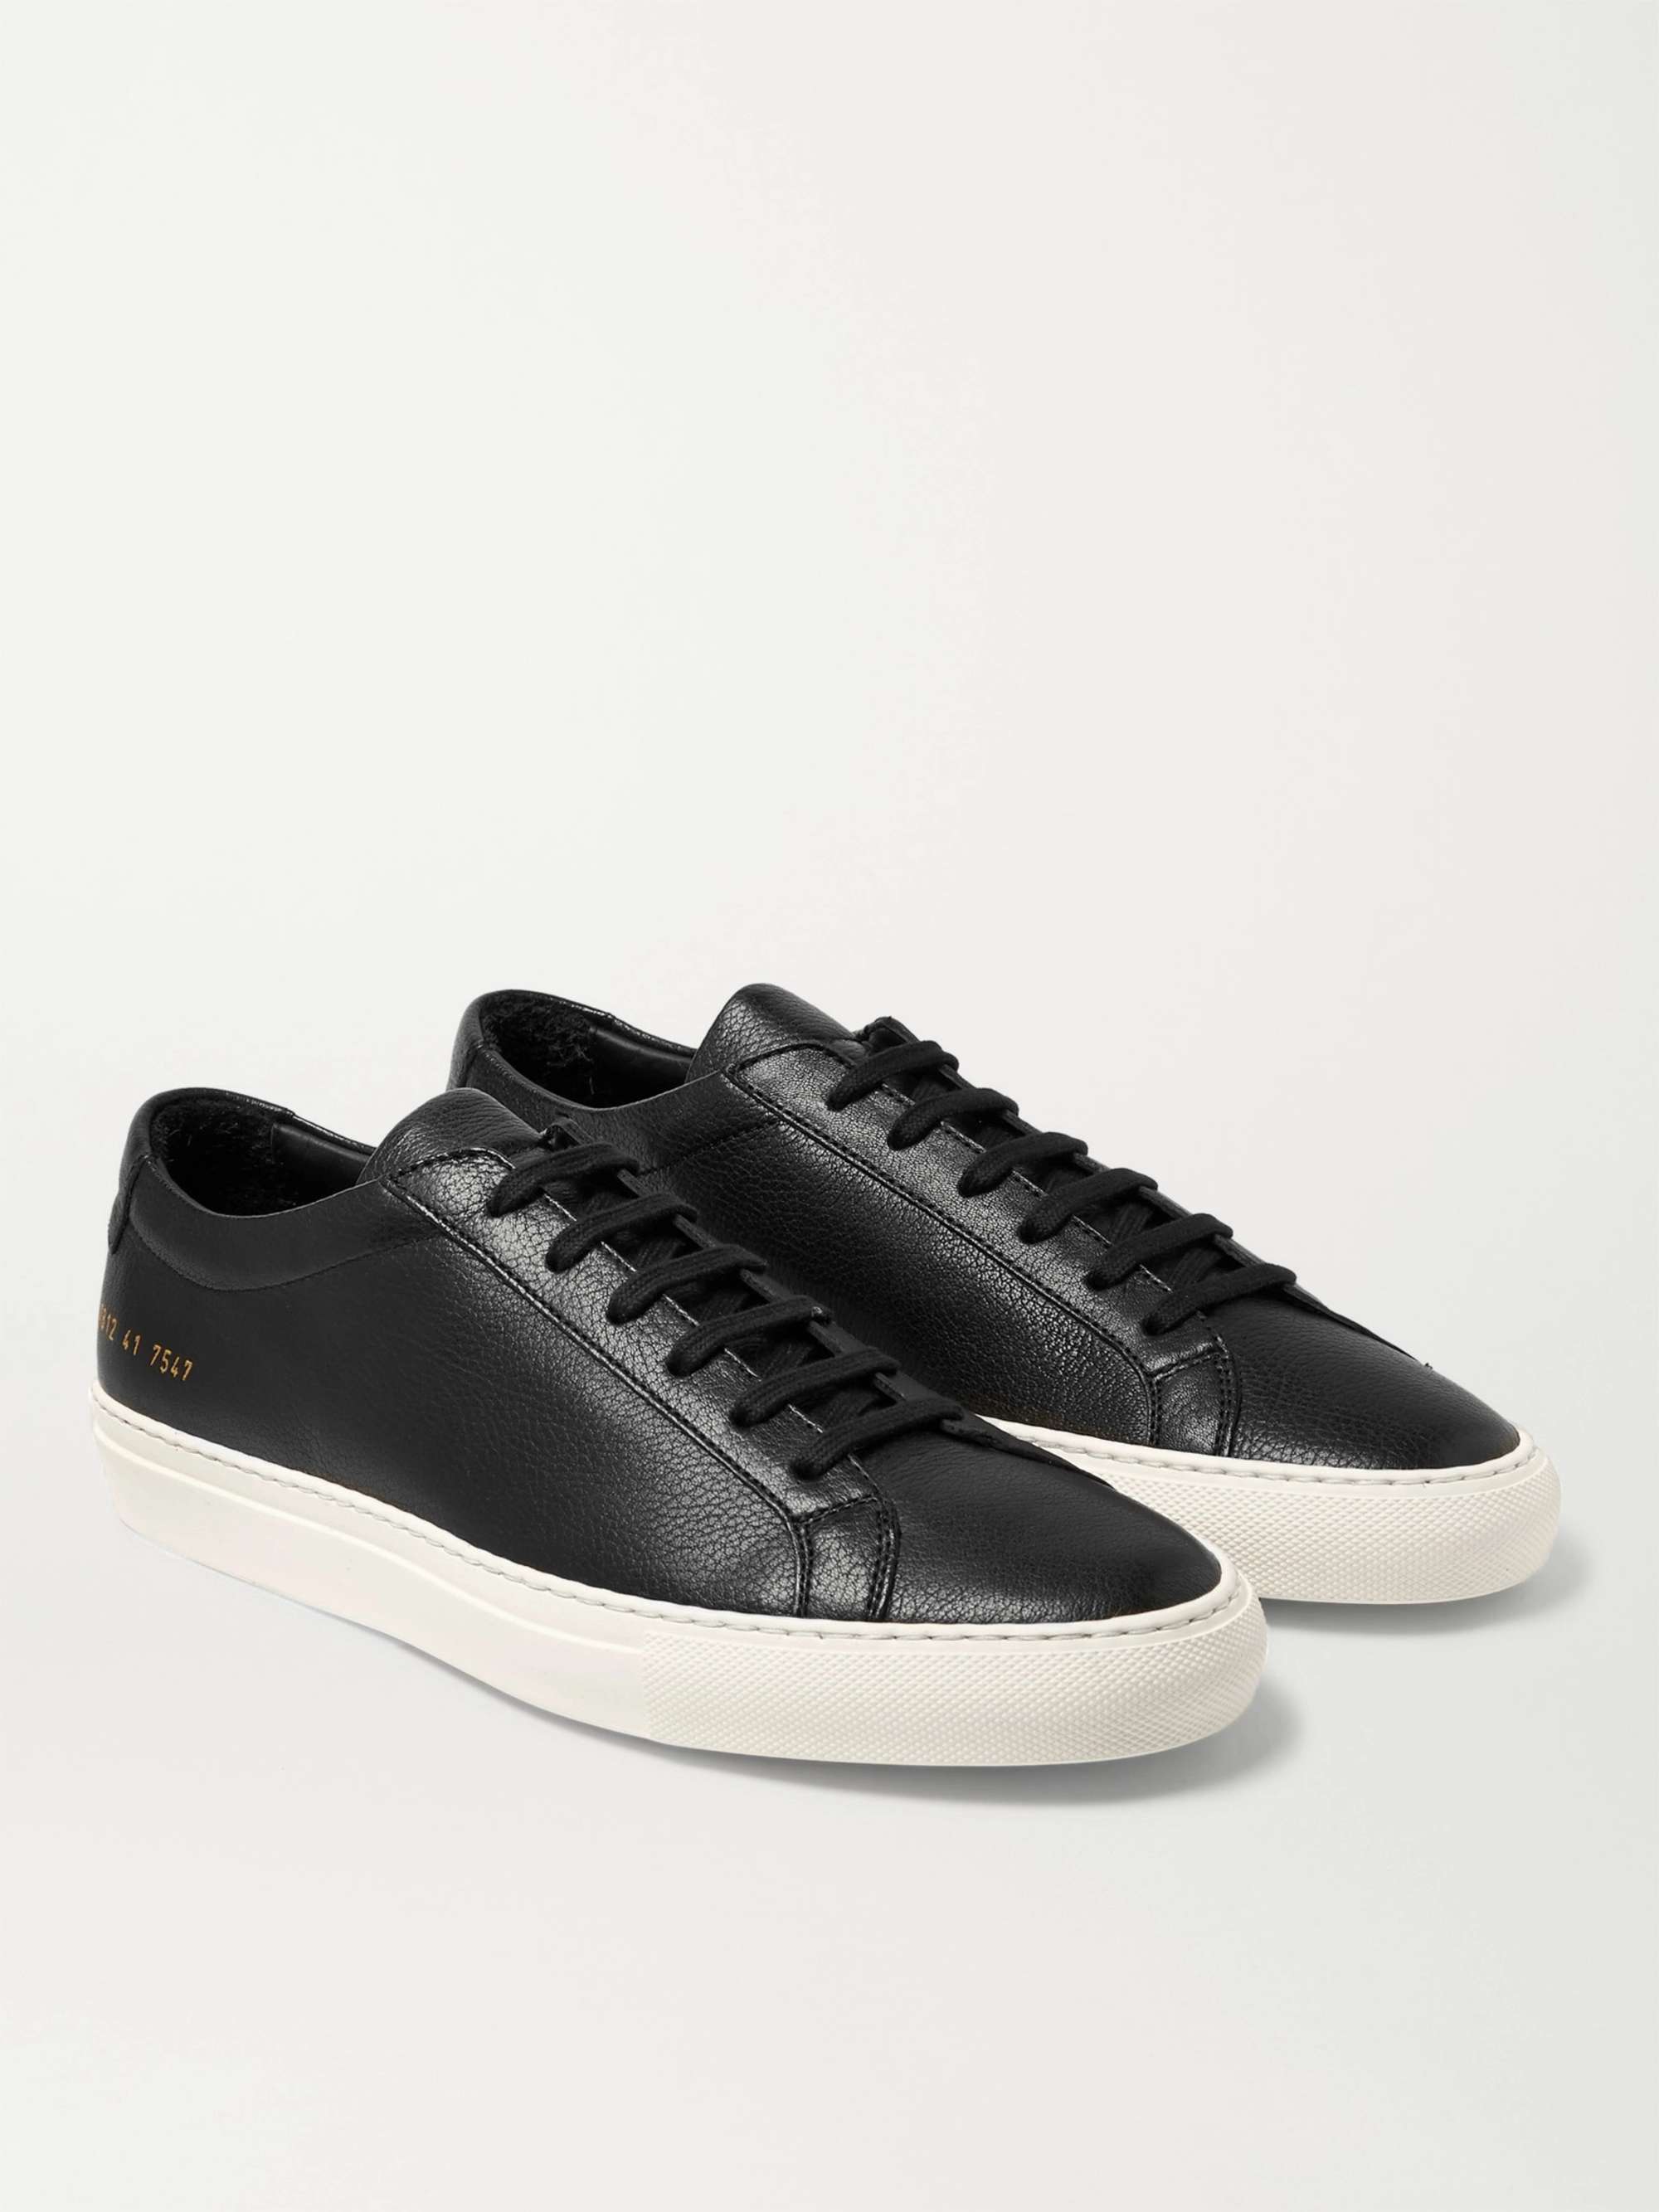 COMMON PROJECTS Original Achilles Full-Grain Leather Sneakers